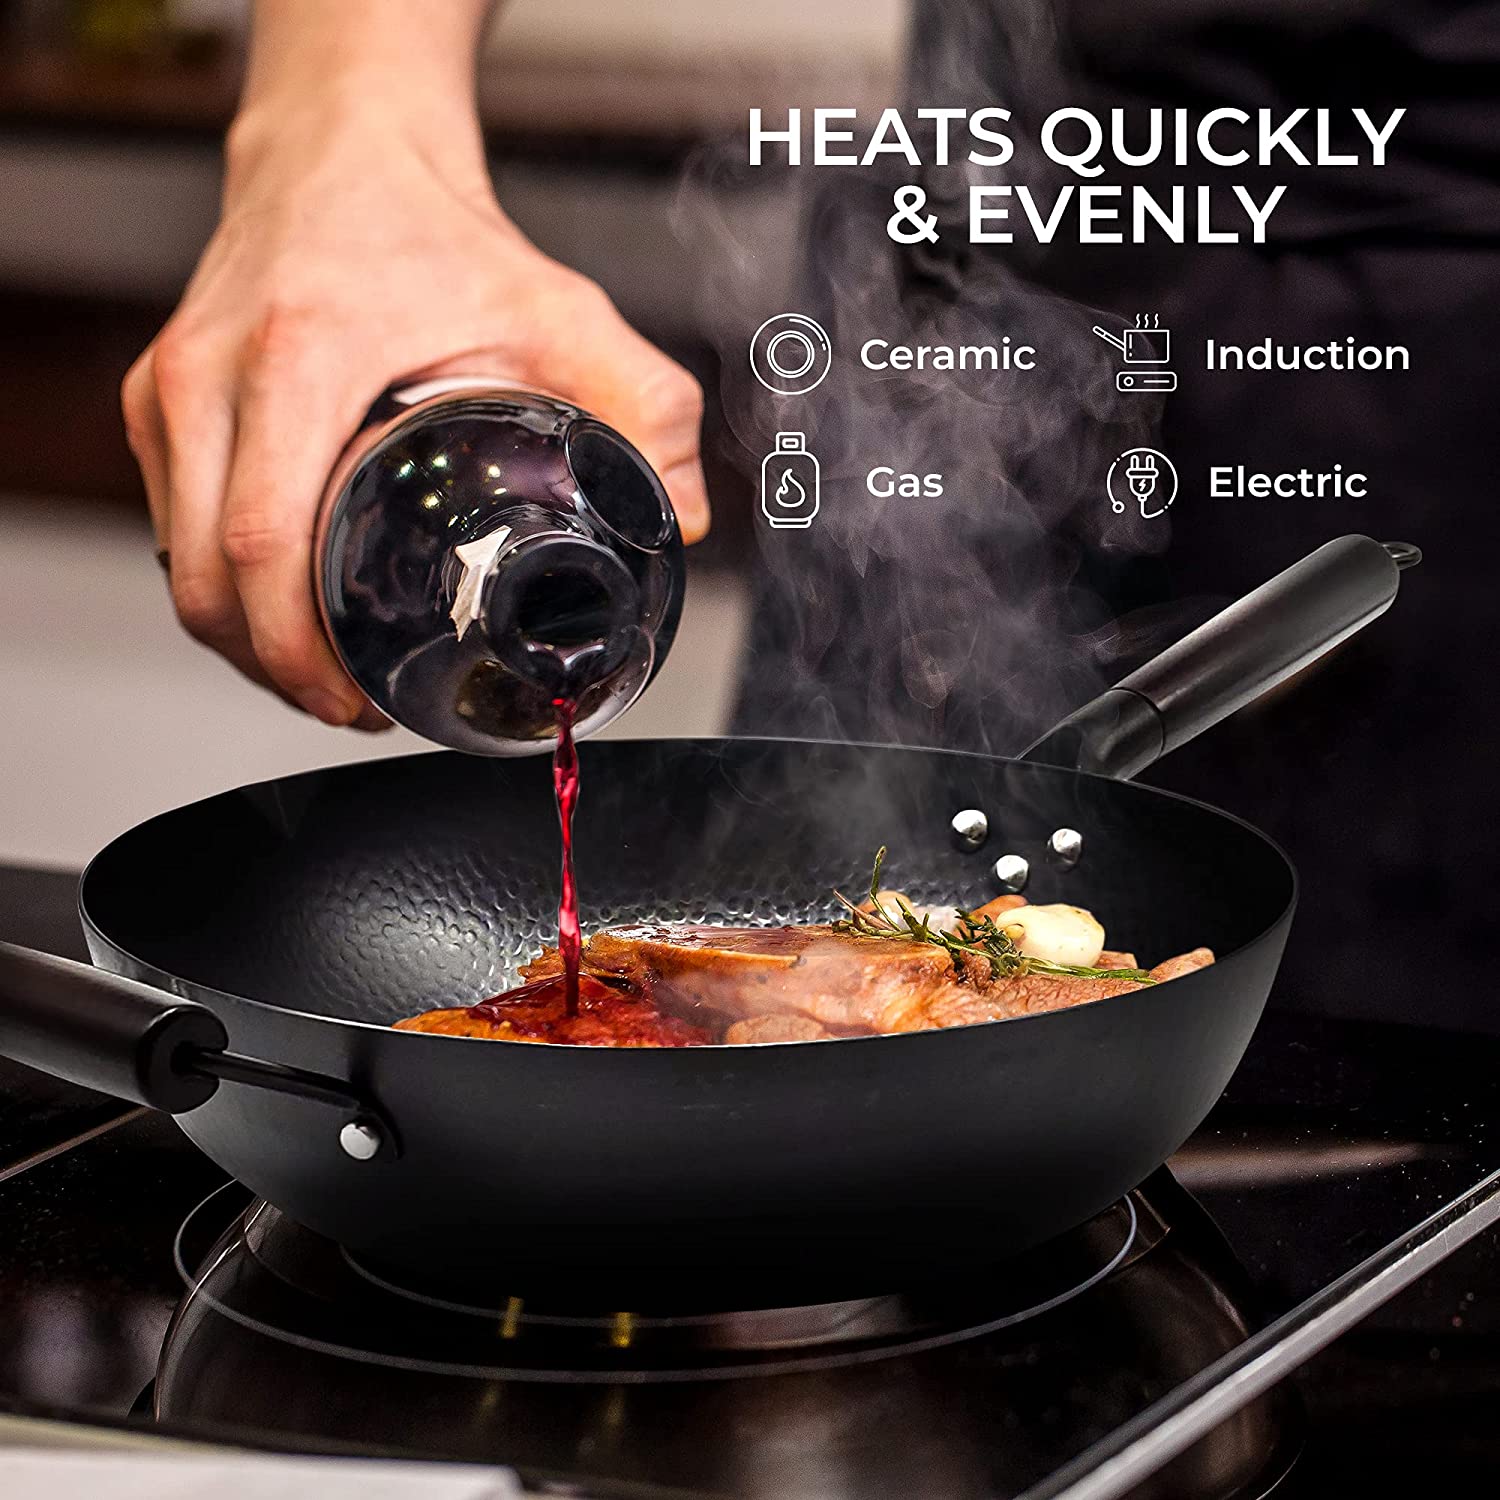 Home EC Carbon Steel Wok pan for Electric, Induction and Gas Stoves - 2mm  Thick Stir Fry Frying Pan – Nonstick, Scratch Resistant, with wooden helper  handle, wooden Lid, spatula, & cleaning